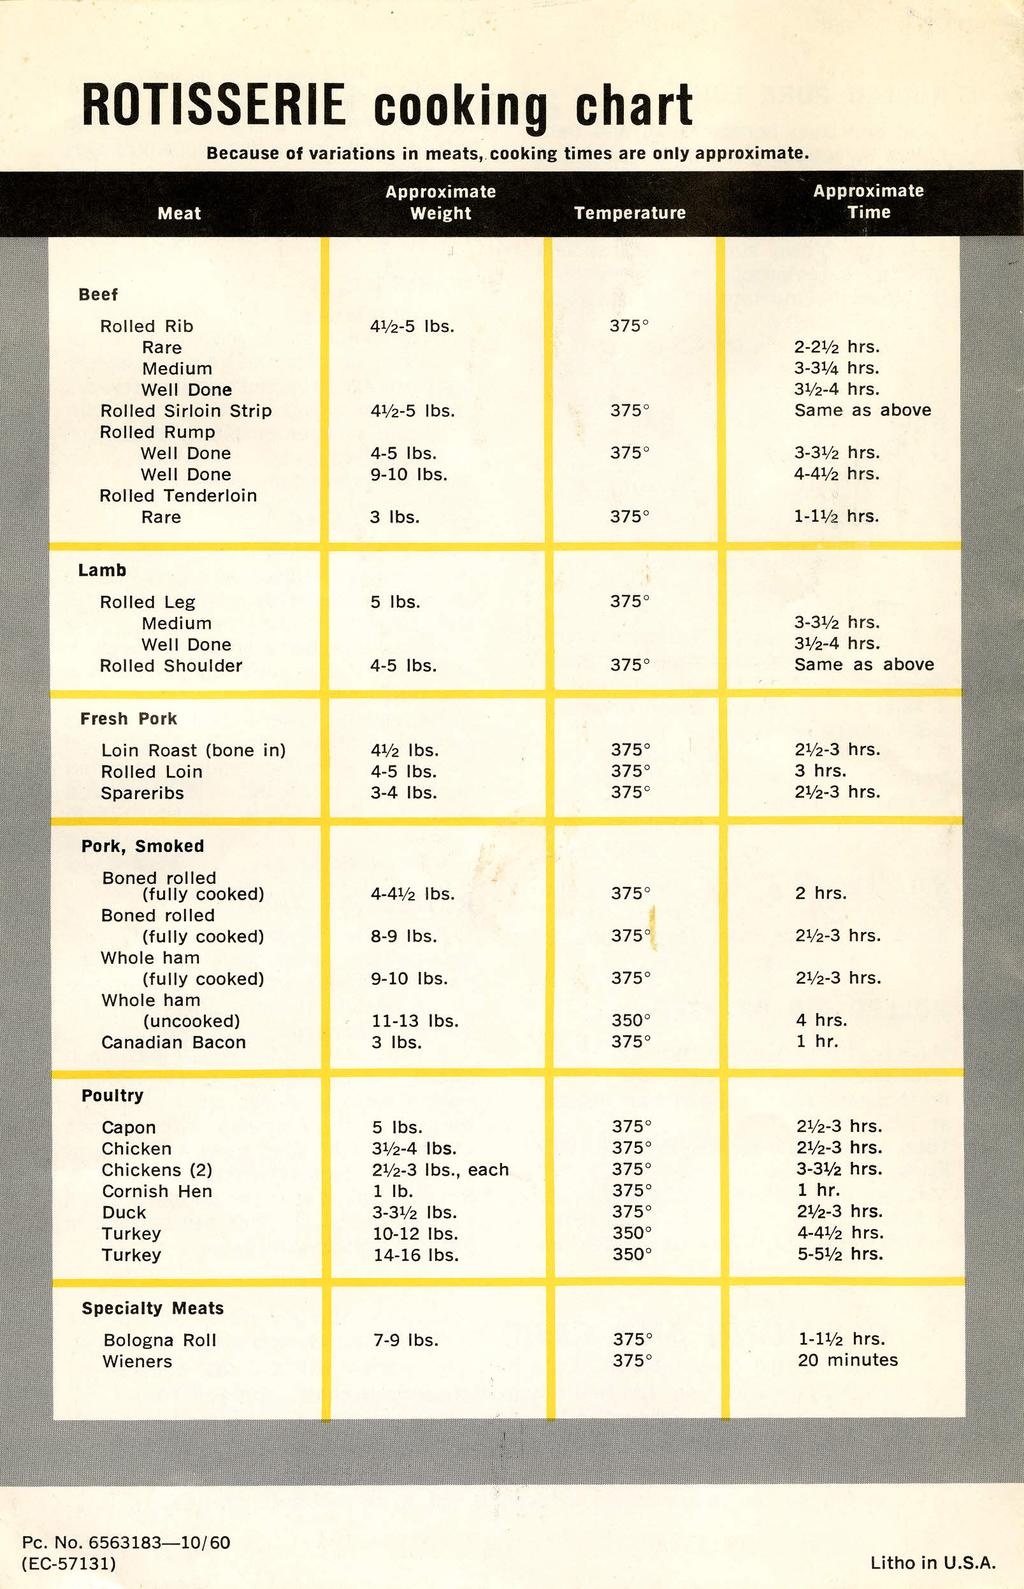 ROTISSERIE cooking chart Because of variations in meats, cooking times are only approximate. Beef Rolled Rib 41/2-5 Ibs. 375 0 Rare 2-2'12 hrs. Medium 3-31/4 hrs. Well Done 31/2-4 hrs.